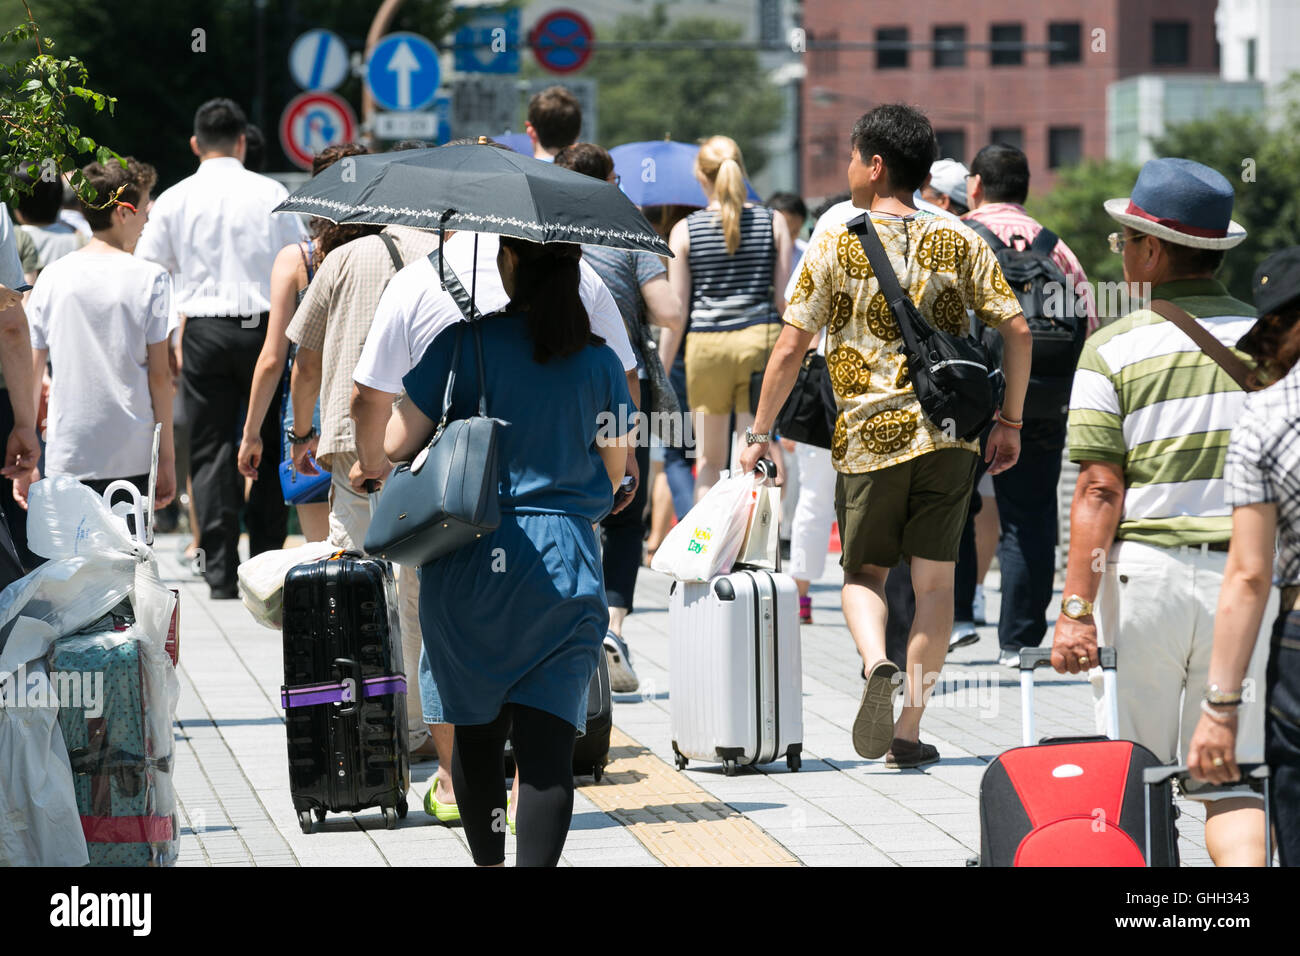 Pedestrians on a hot day in downtown Tokyo on August 5, 2016, Tokyo, Japan. The Japan Meteorological Agency registered temperatures of 35C degrees in Tokyo, making this one of the hottest days of the year. The current heatwave is expected to bring hot days next week across country. The government issued heat stroke warnings because of the high temperatures. © Rodrigo Reyes Marin/AFLO/Alamy Live News Stock Photo